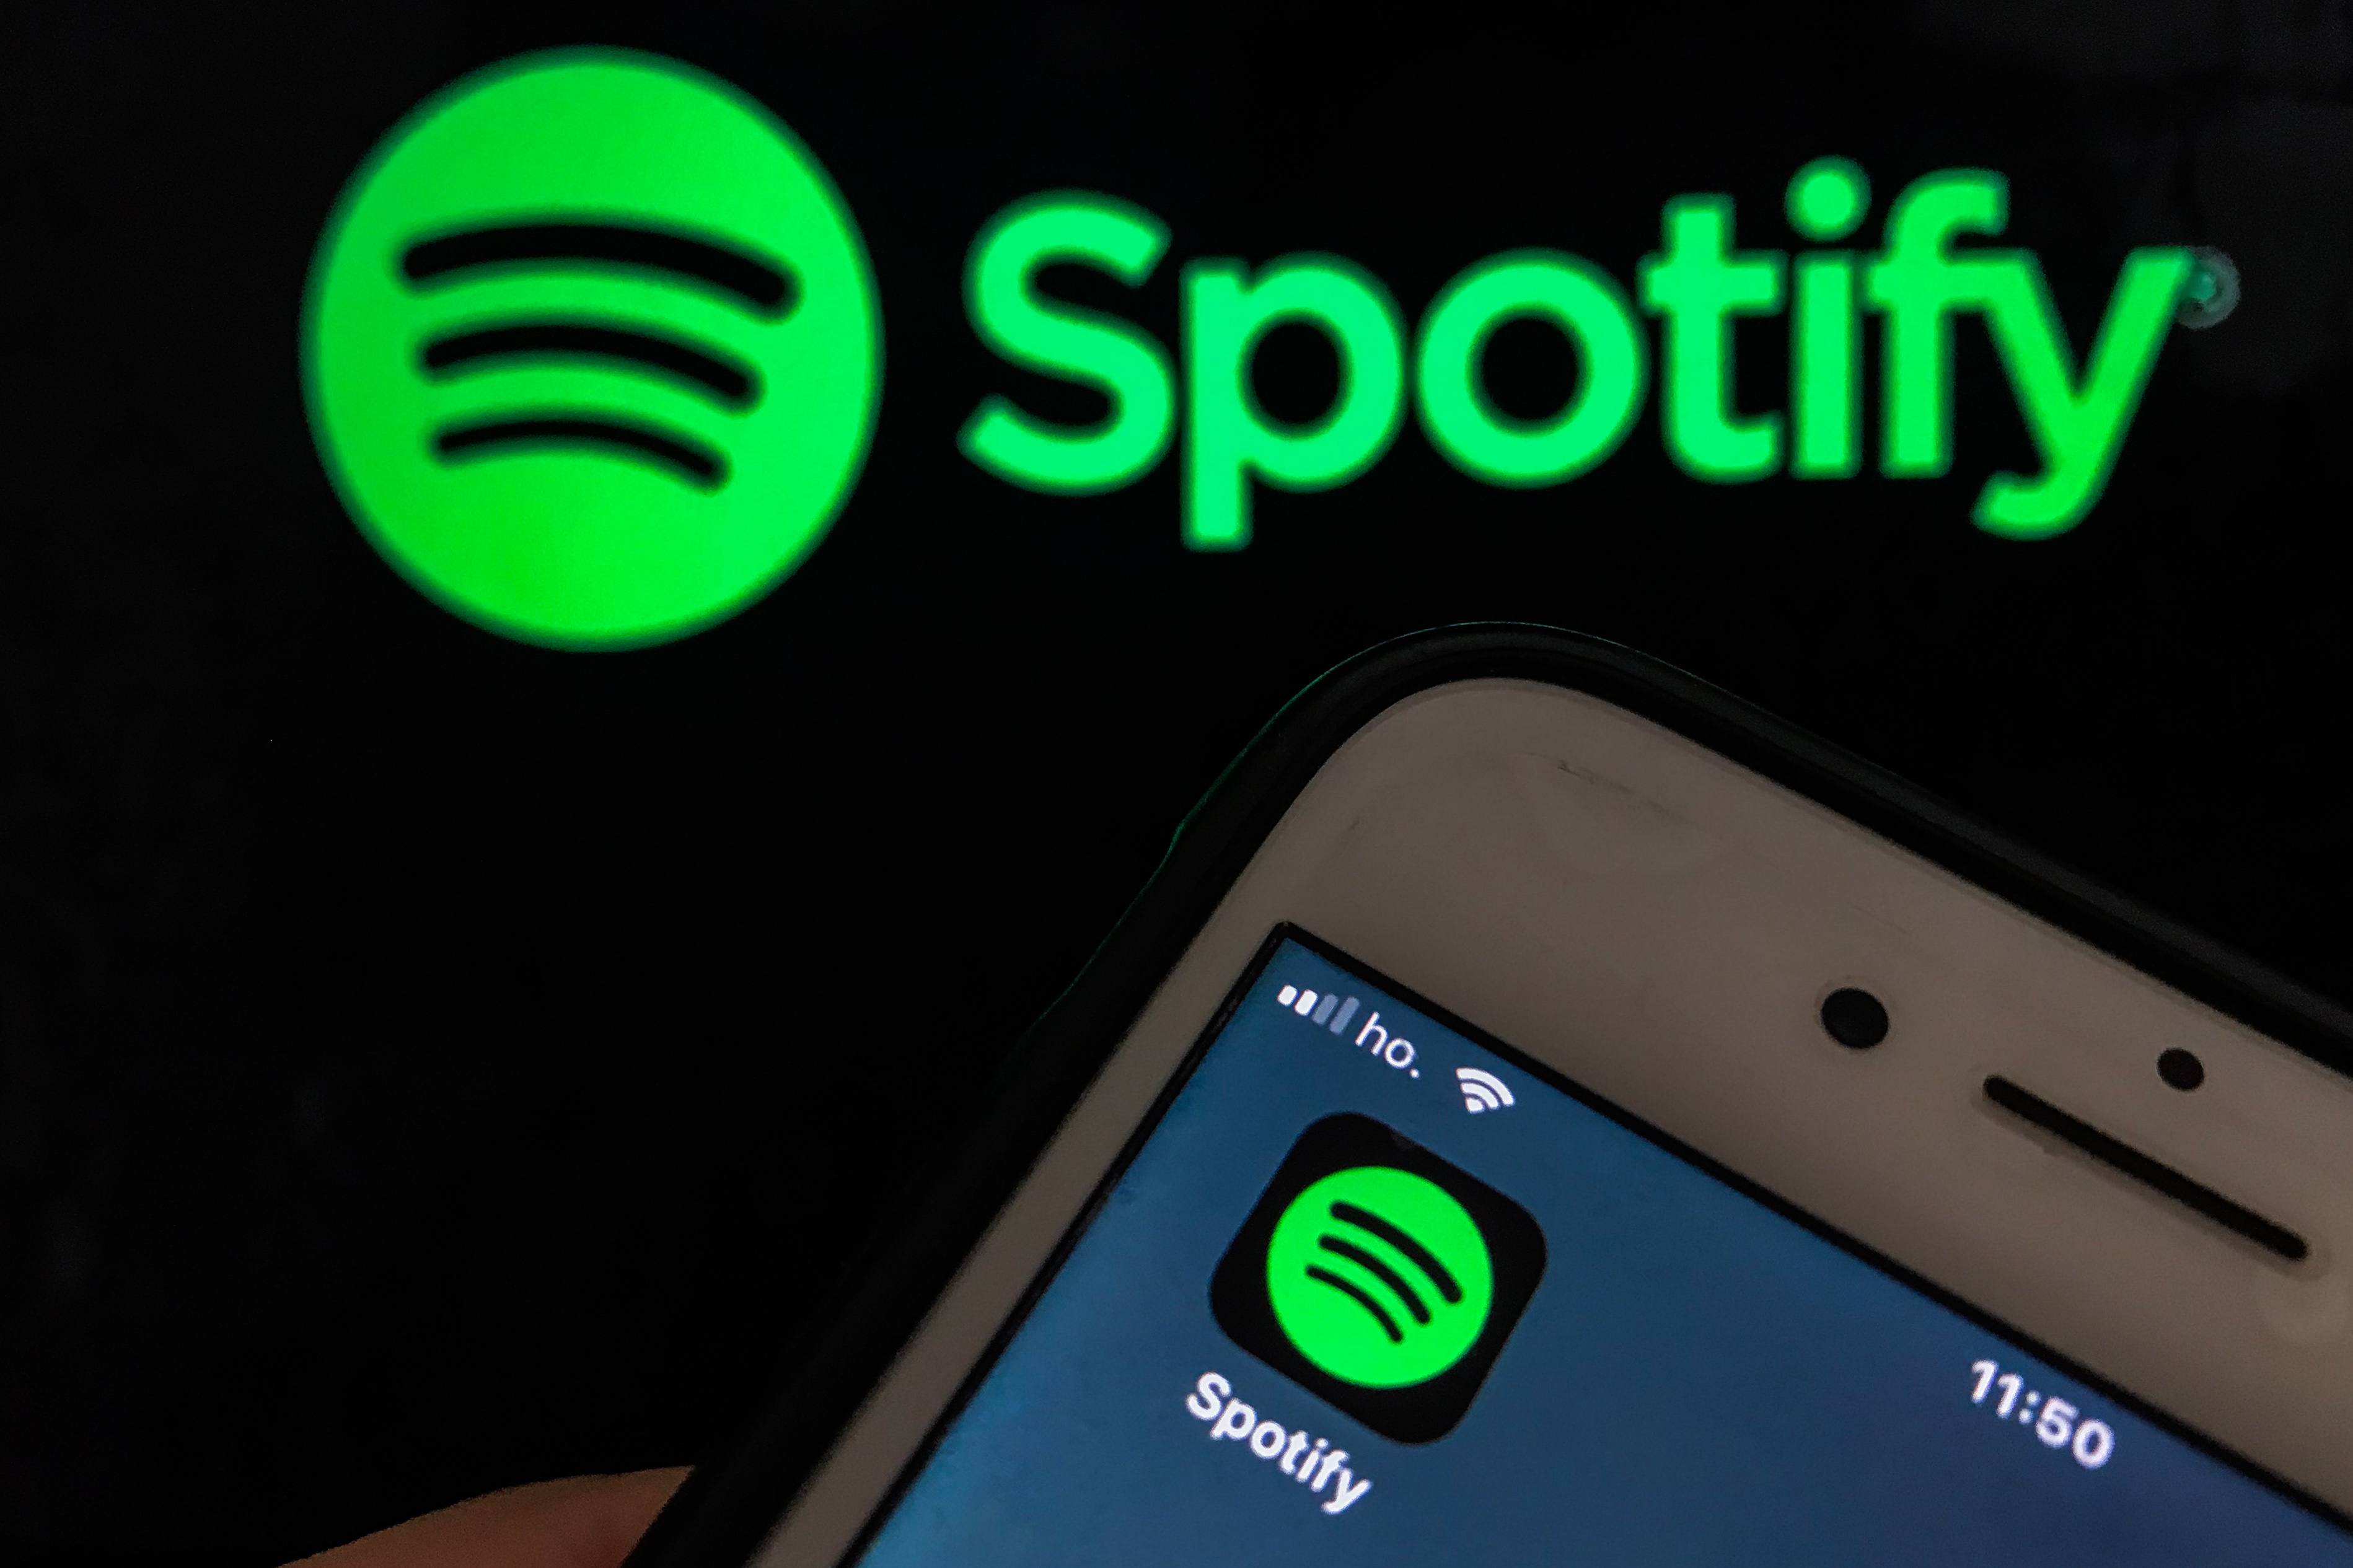 Spotify Wrapped: Here's How Spotify Calculates Your Listening Data